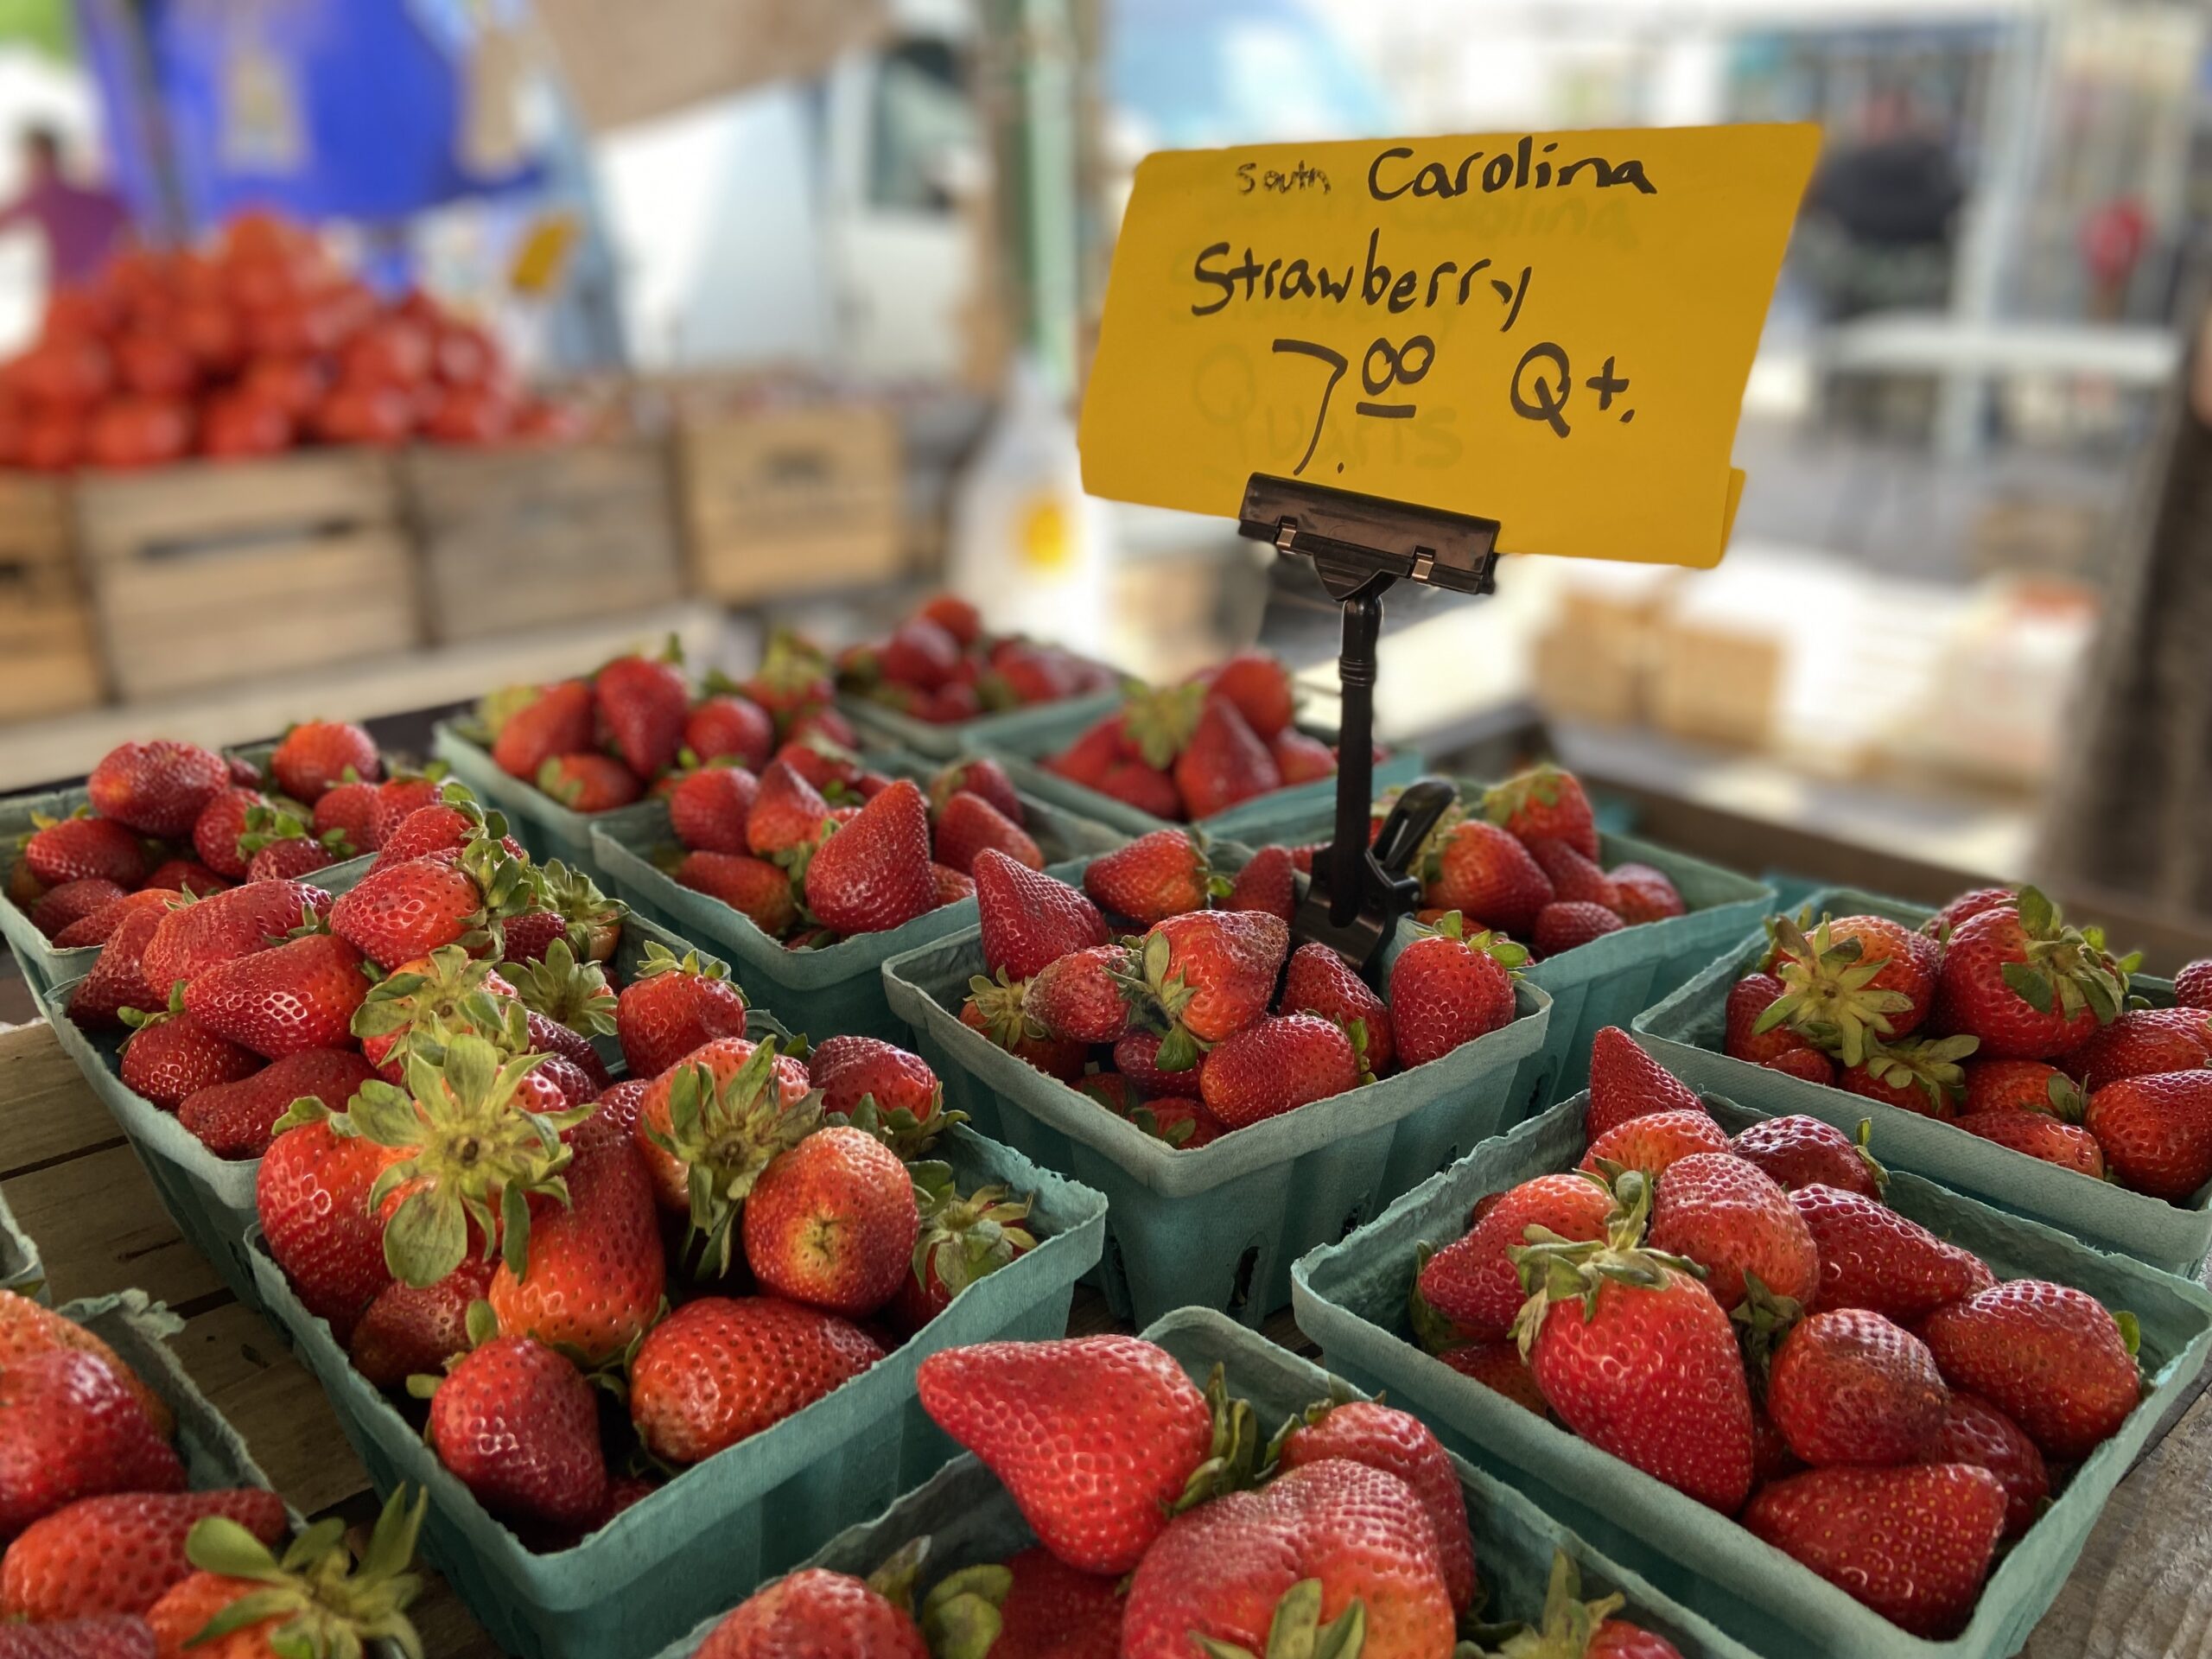 A box of strawberries on display at a farmers market near Capitol Hill. Photo by Will Schick.